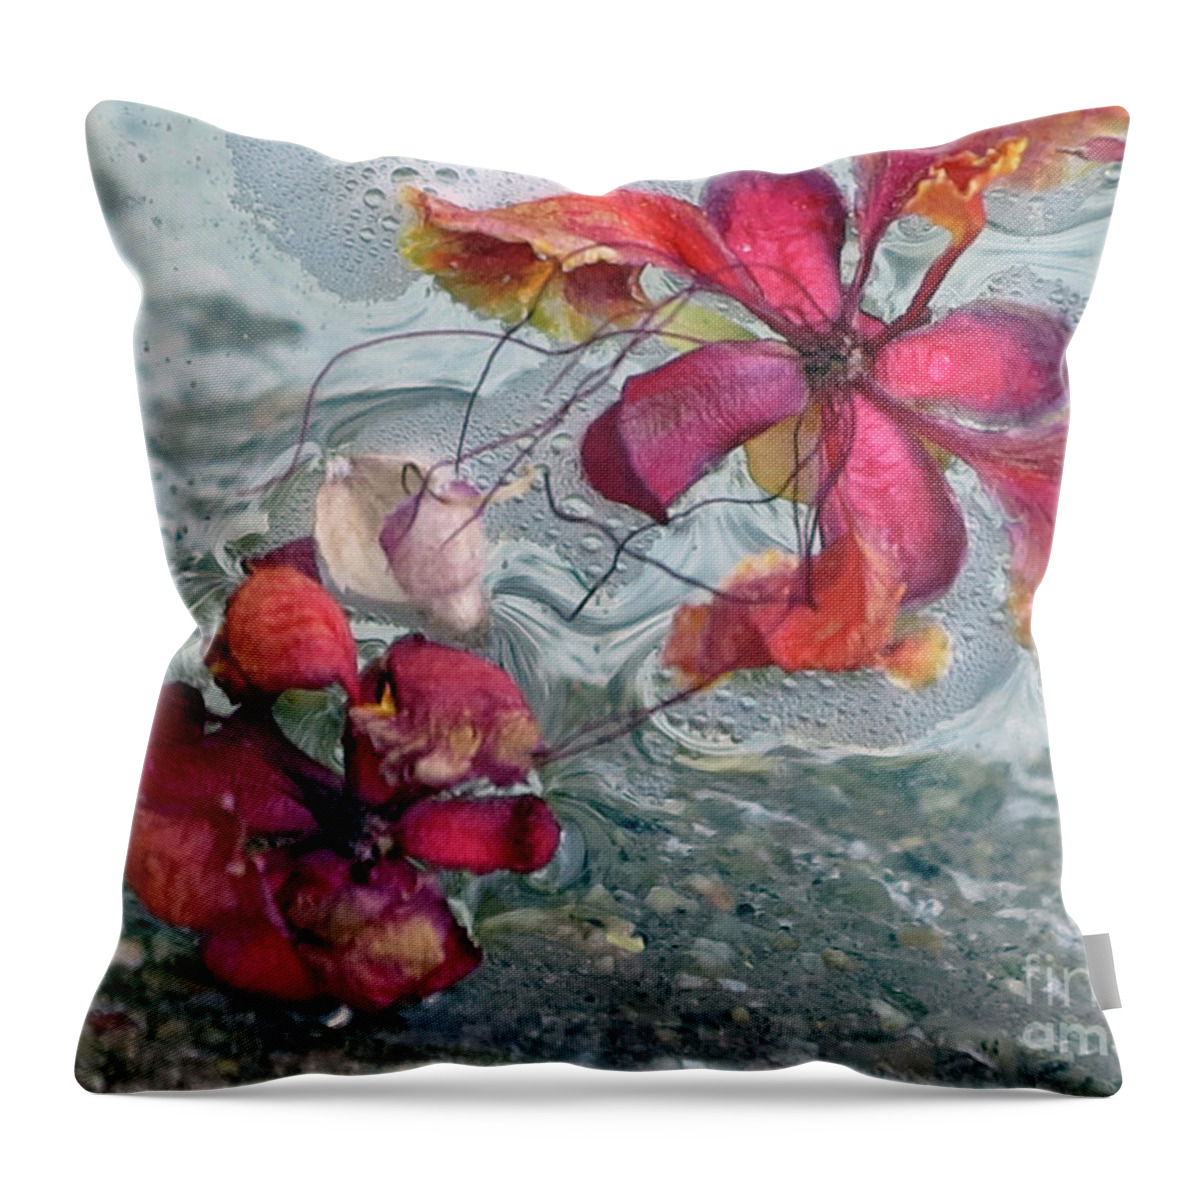 Water Throw Pillow featuring the photograph Floating Flowers by Hazel Vaughn